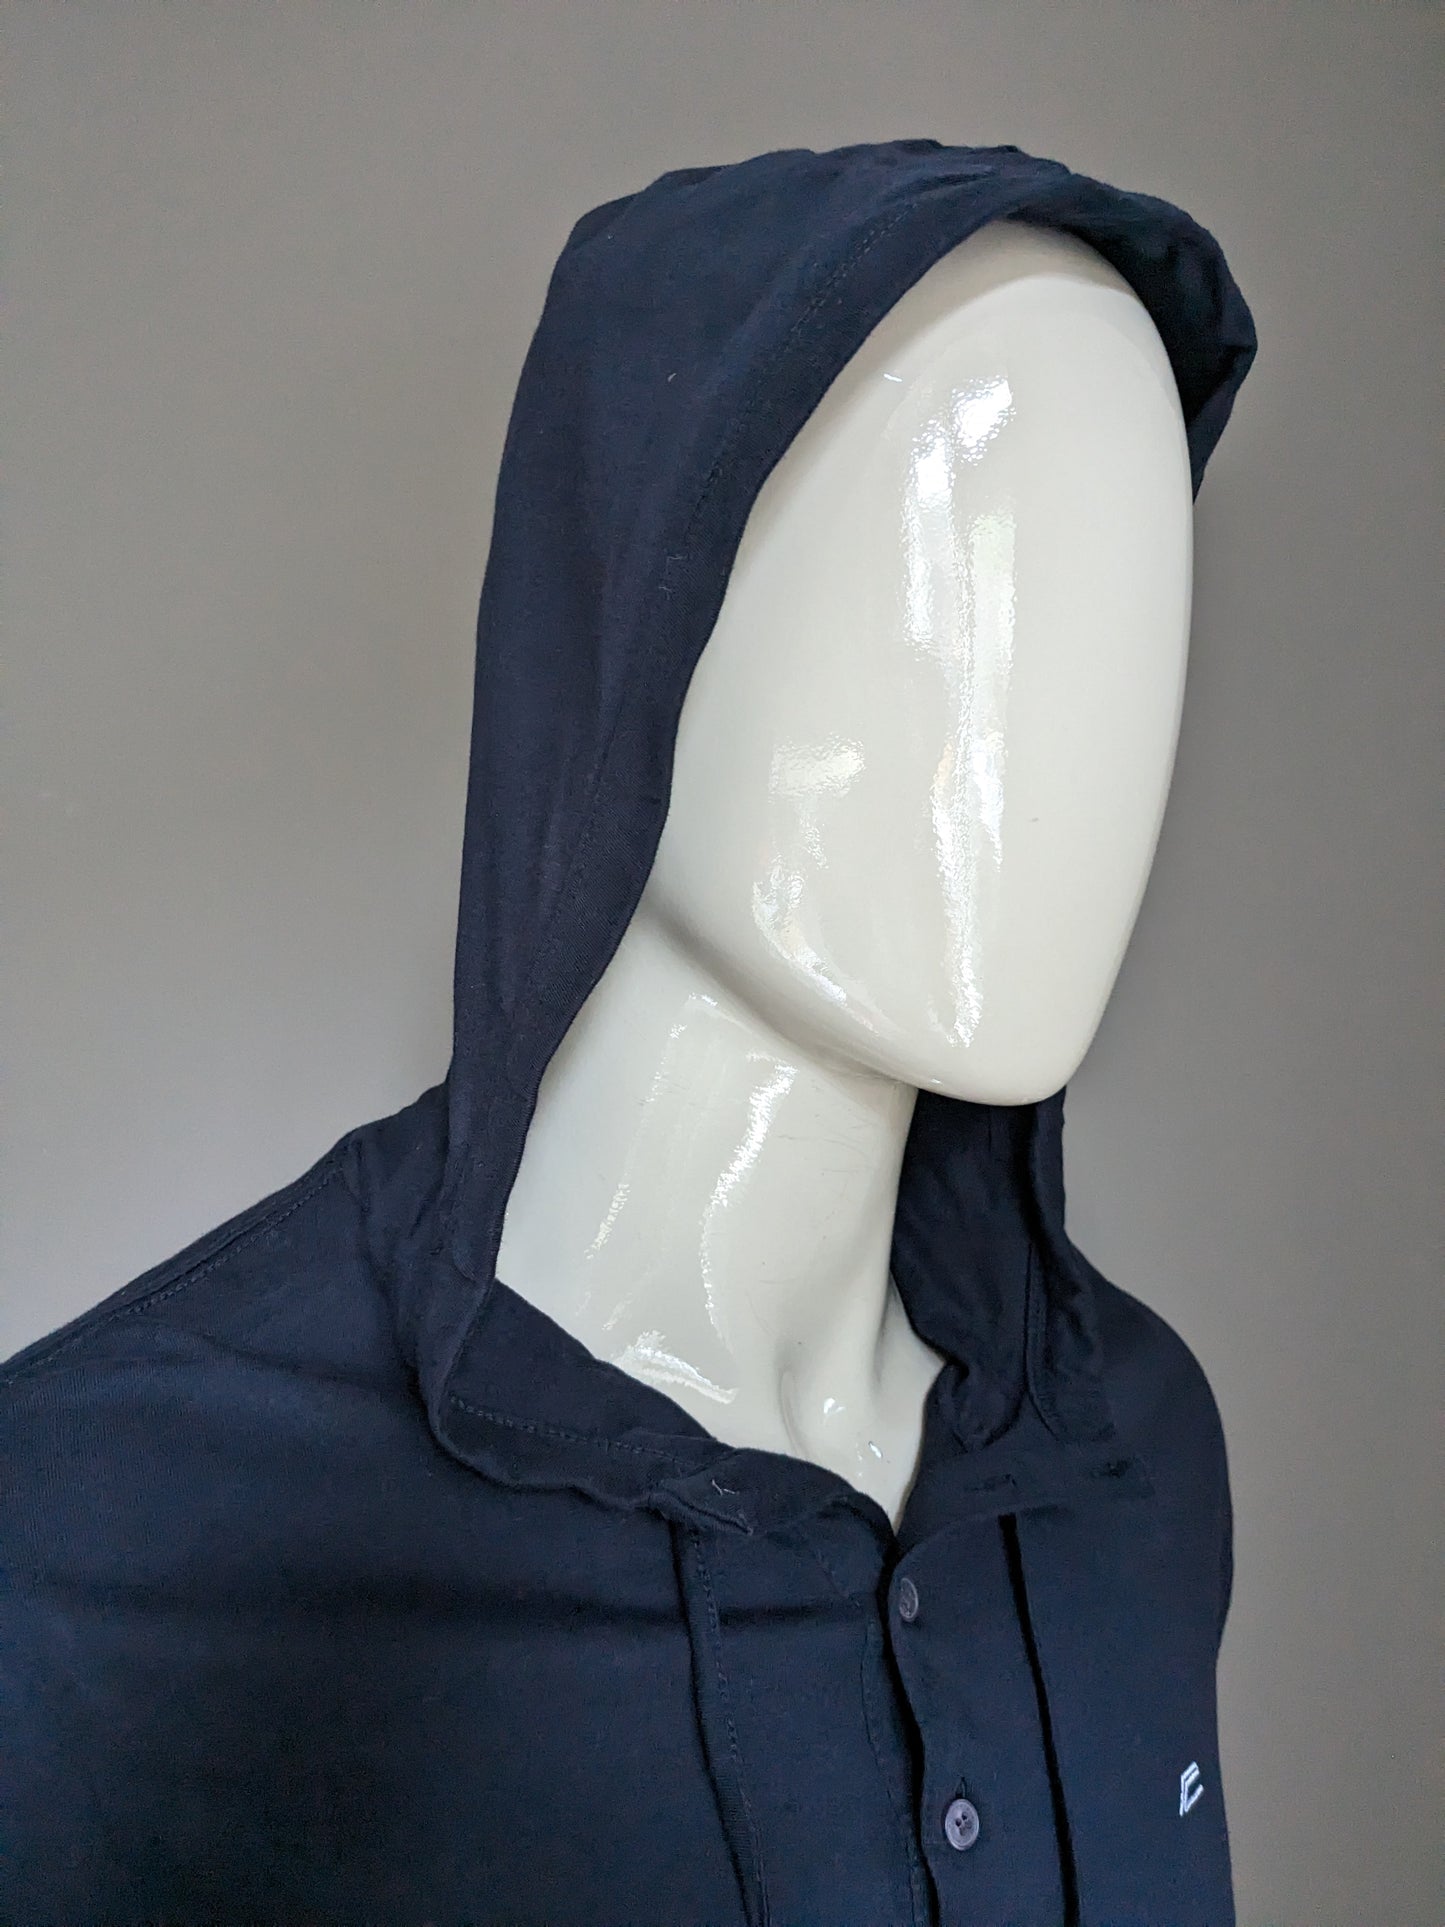 French Connection Hoodie / Longsleeve with hood. Dark blue colored. Size L.